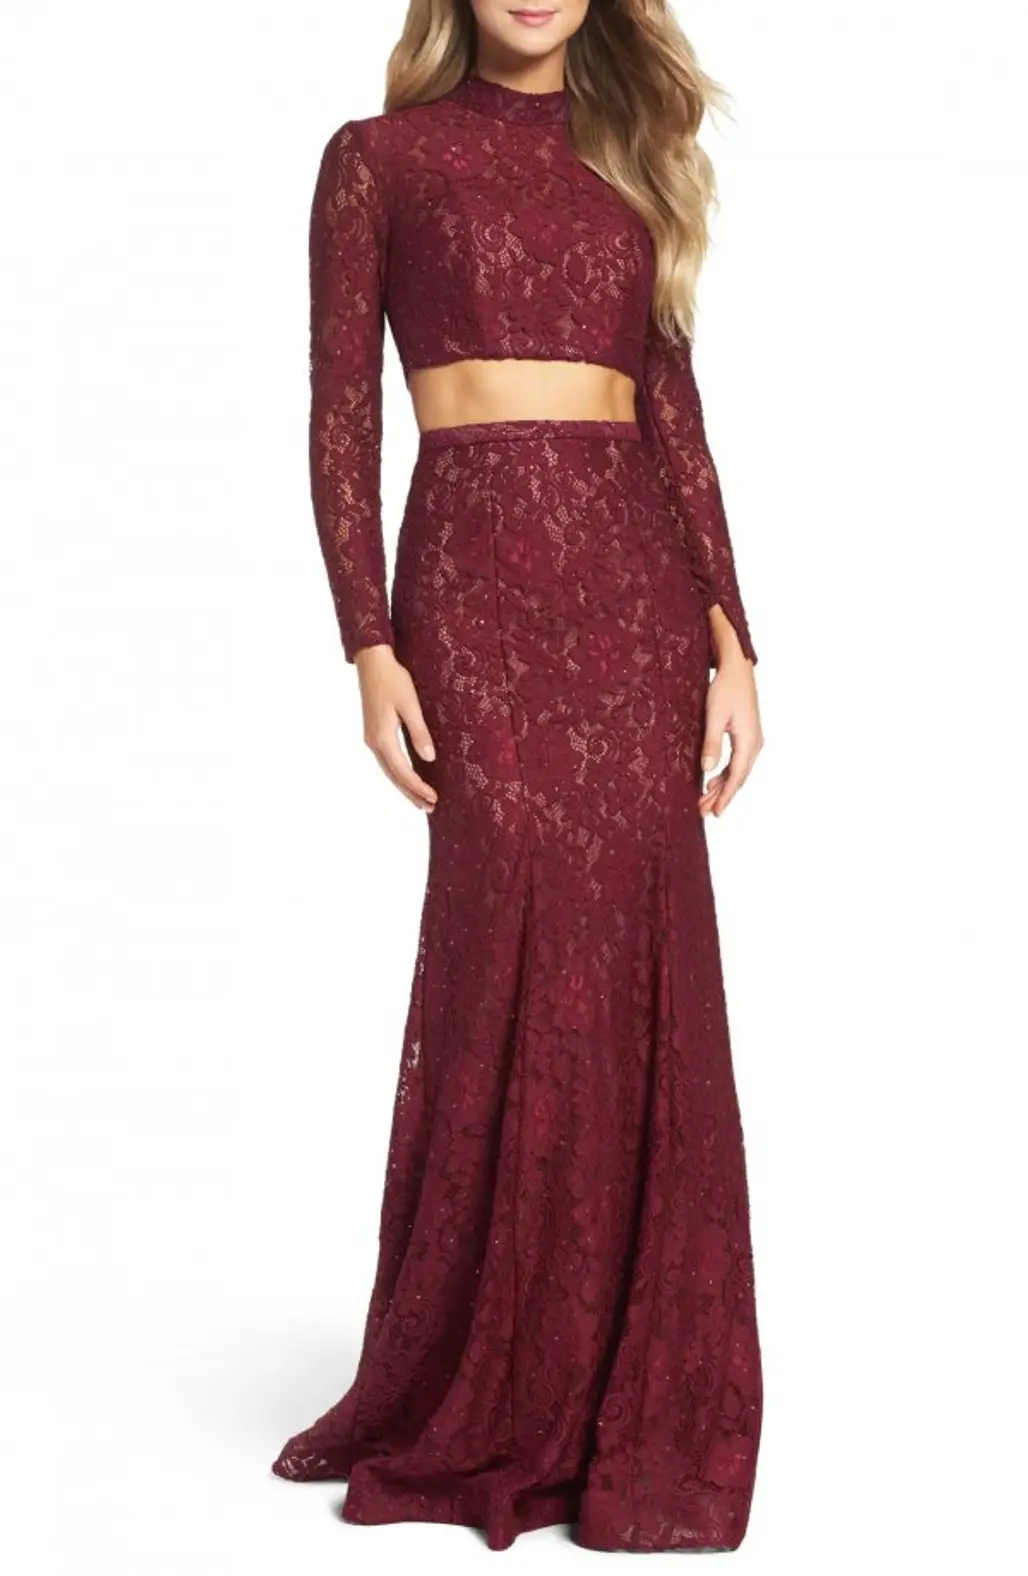 day dress, clothing, dress, gown, maroon,